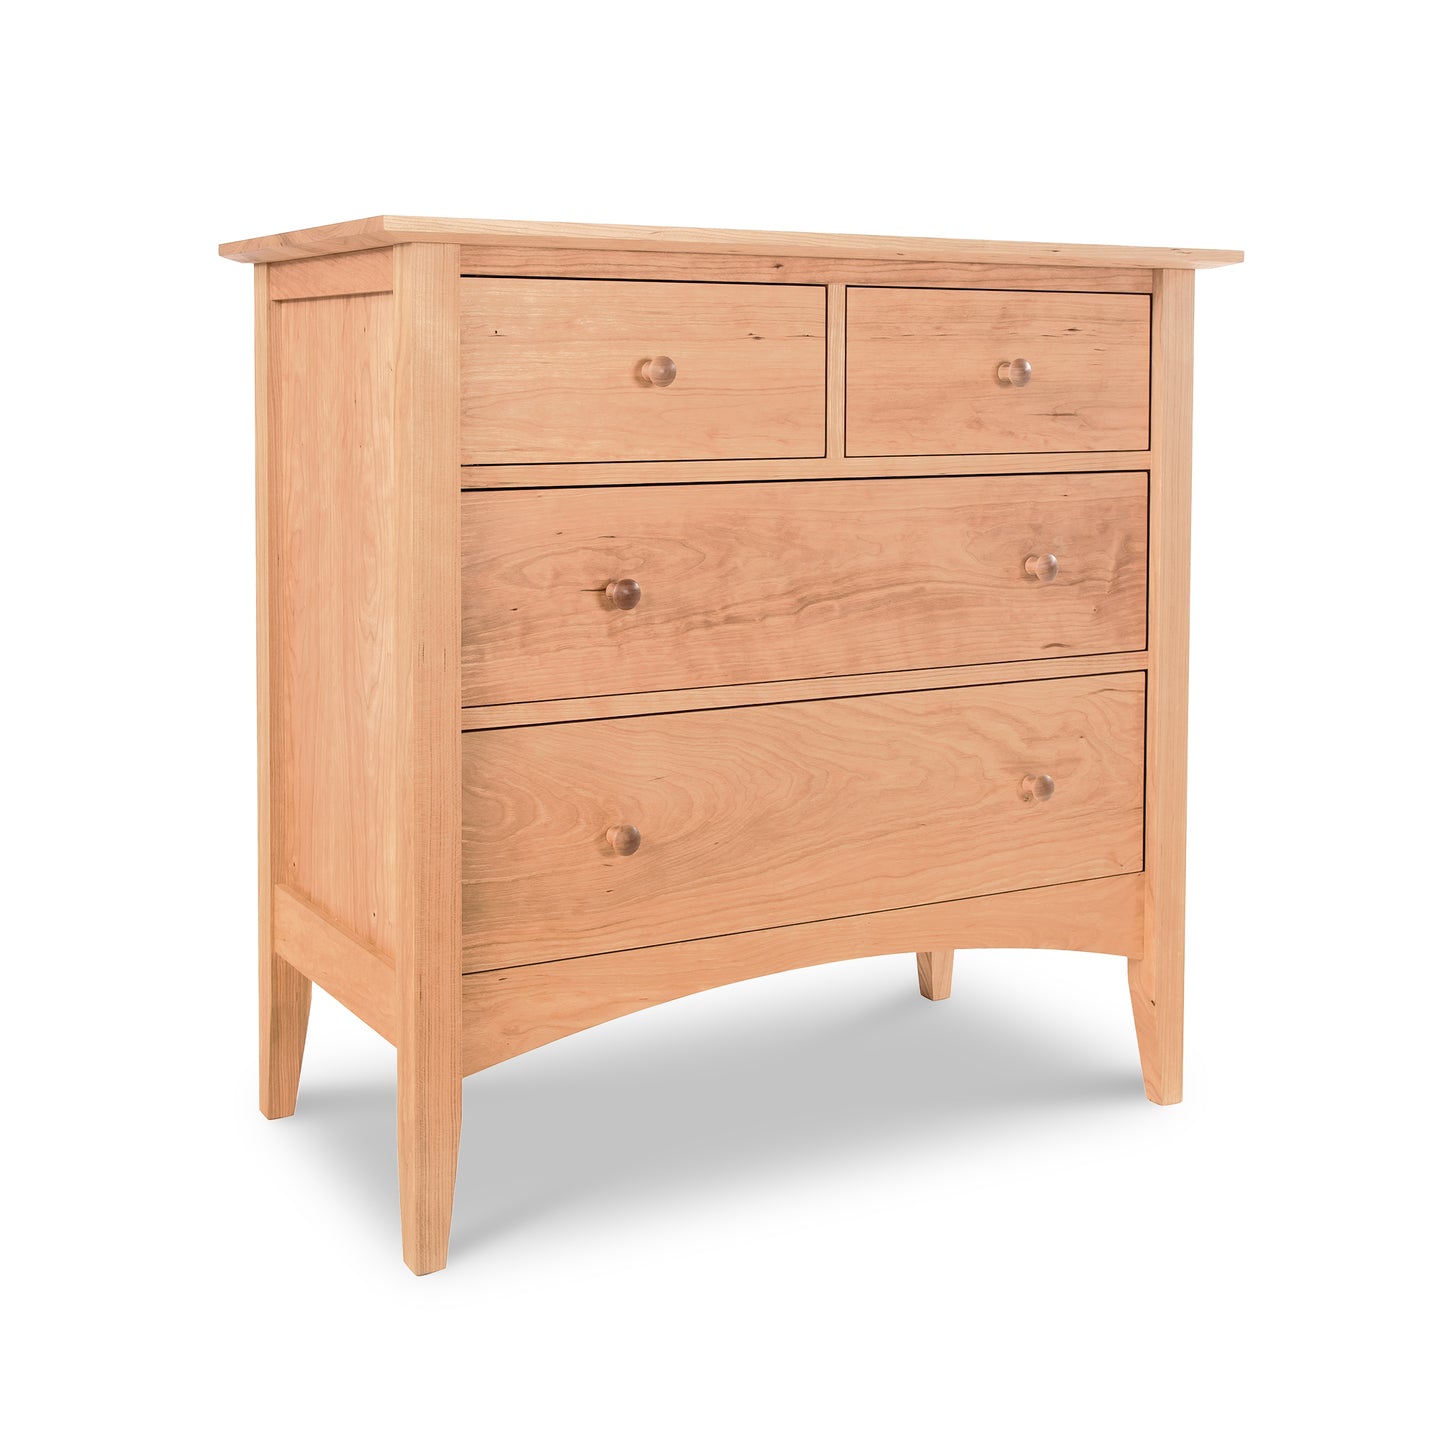 A American Shaker 4-Drawer Chest from the Maple Corner Woodworks furniture collection, with four drawers, featuring a light natural finish and round knobs, set against a plain white background.